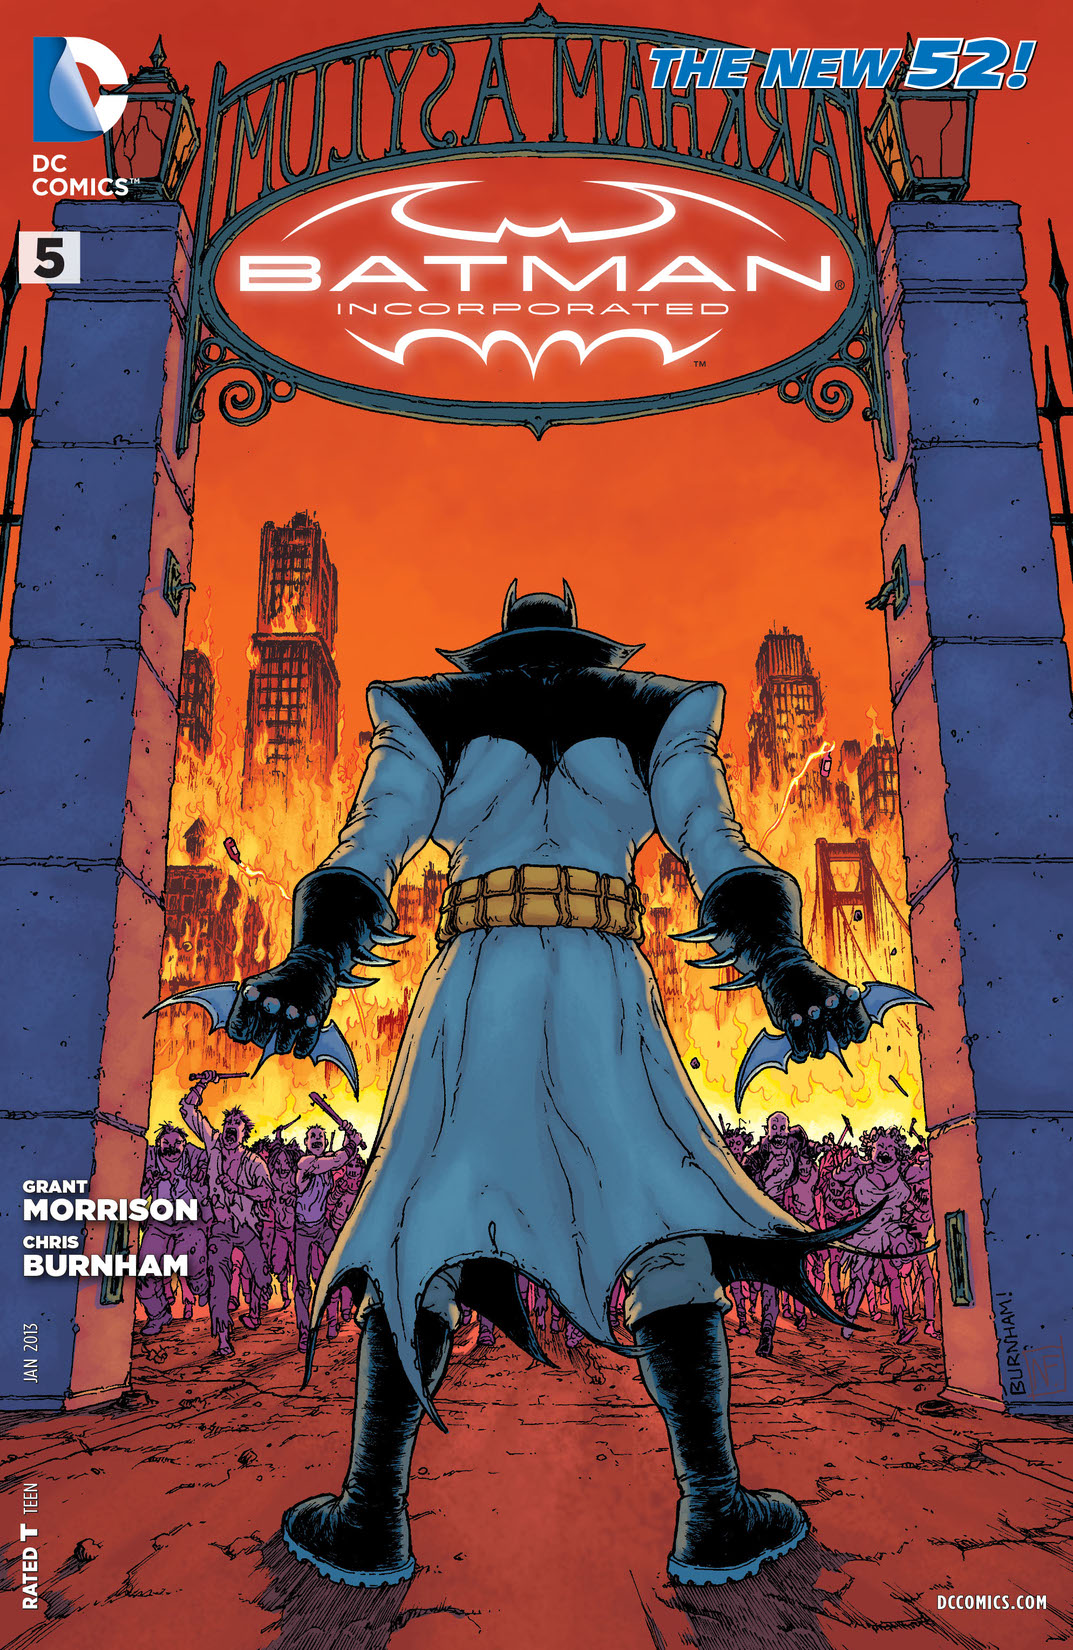 Batman Incorporated (2012-) #5 preview images